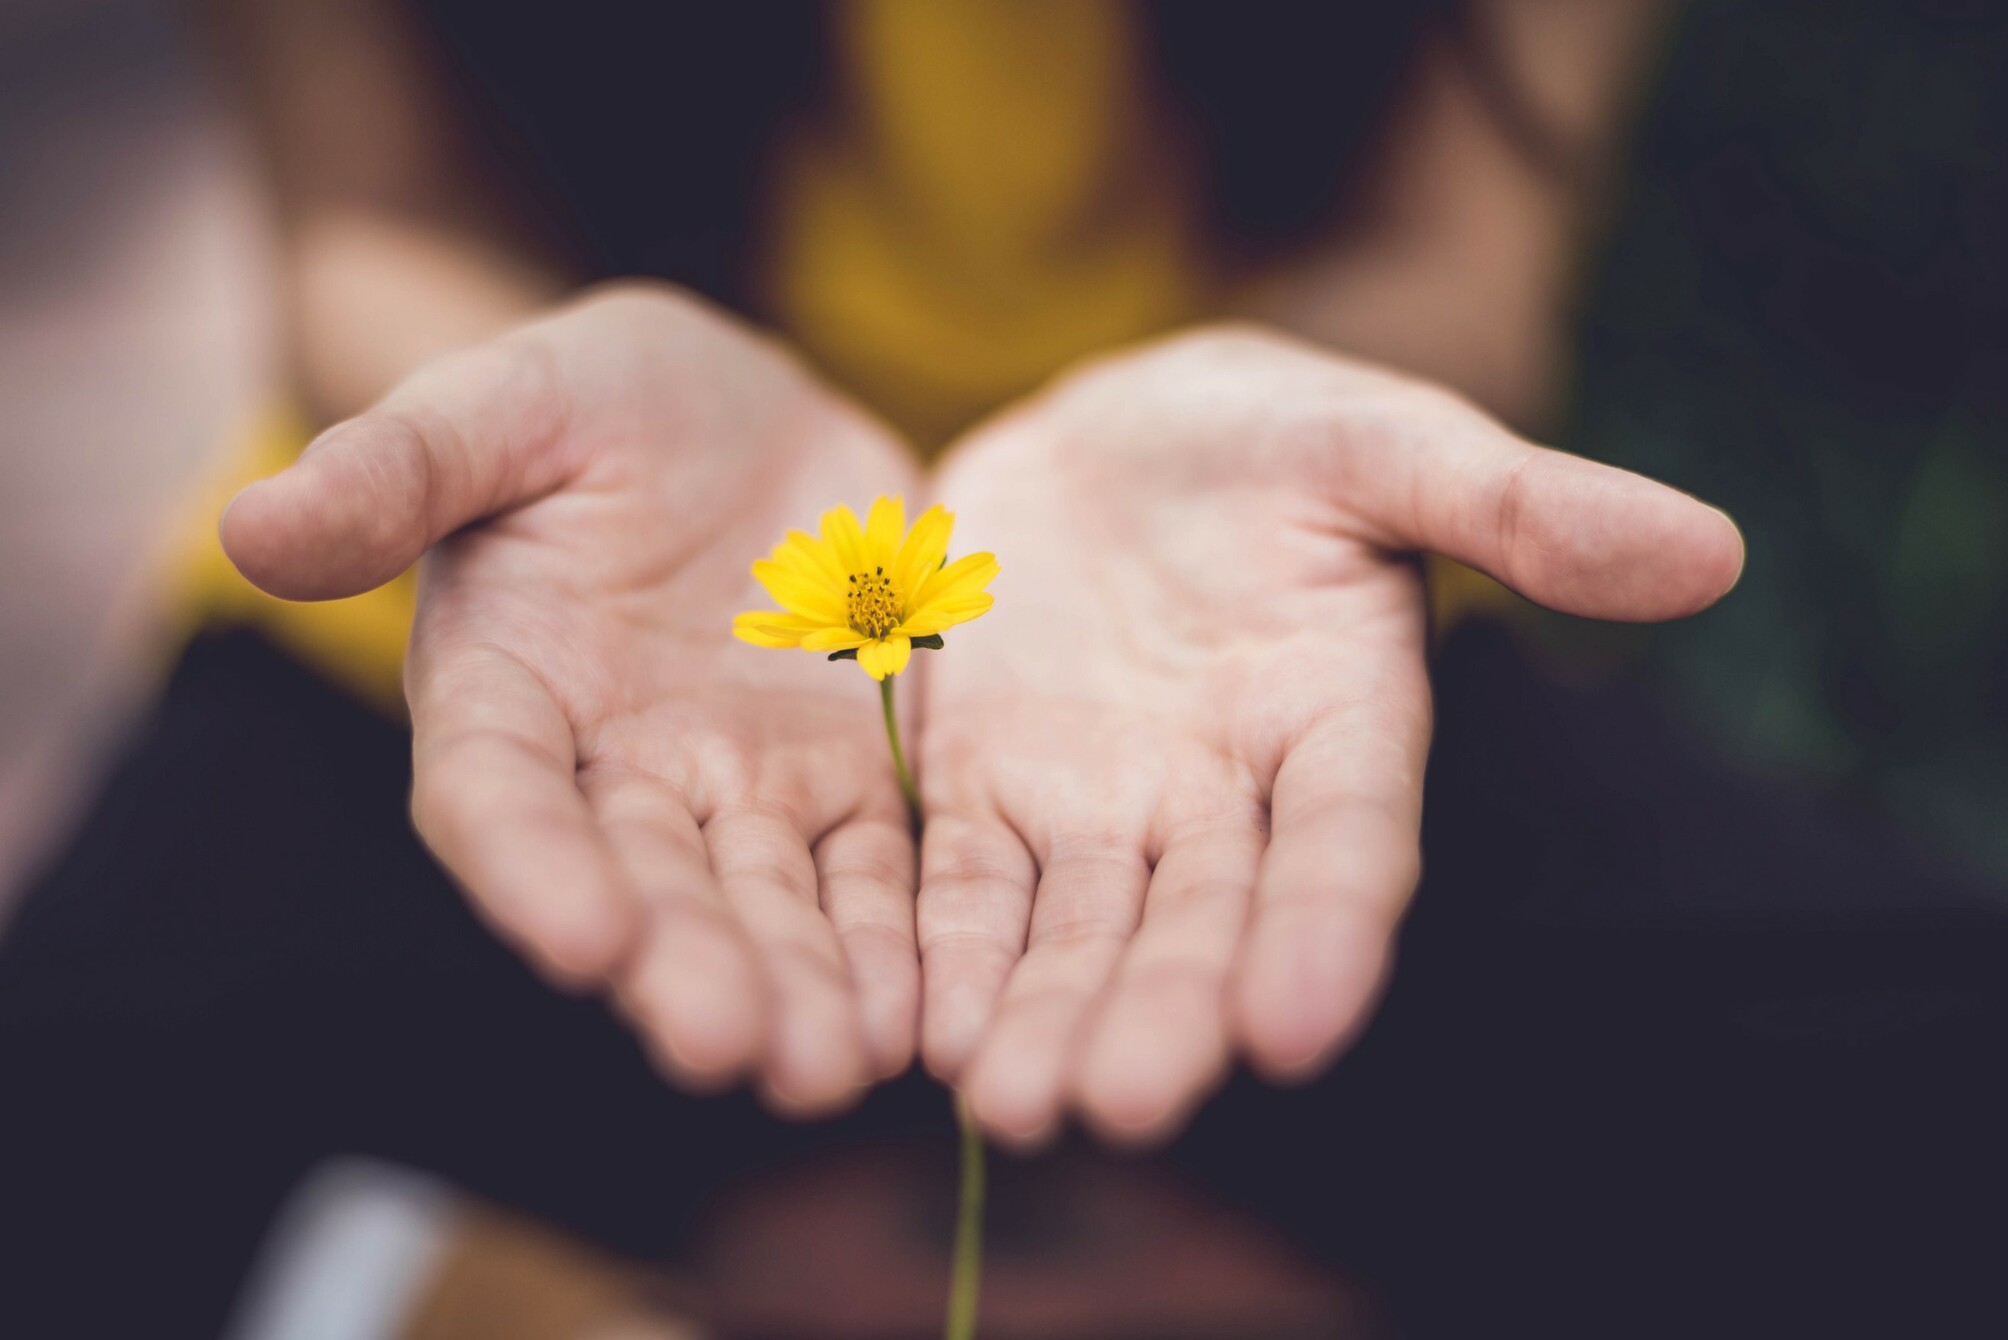 A person holding a dandelion in-between the palms of their hands